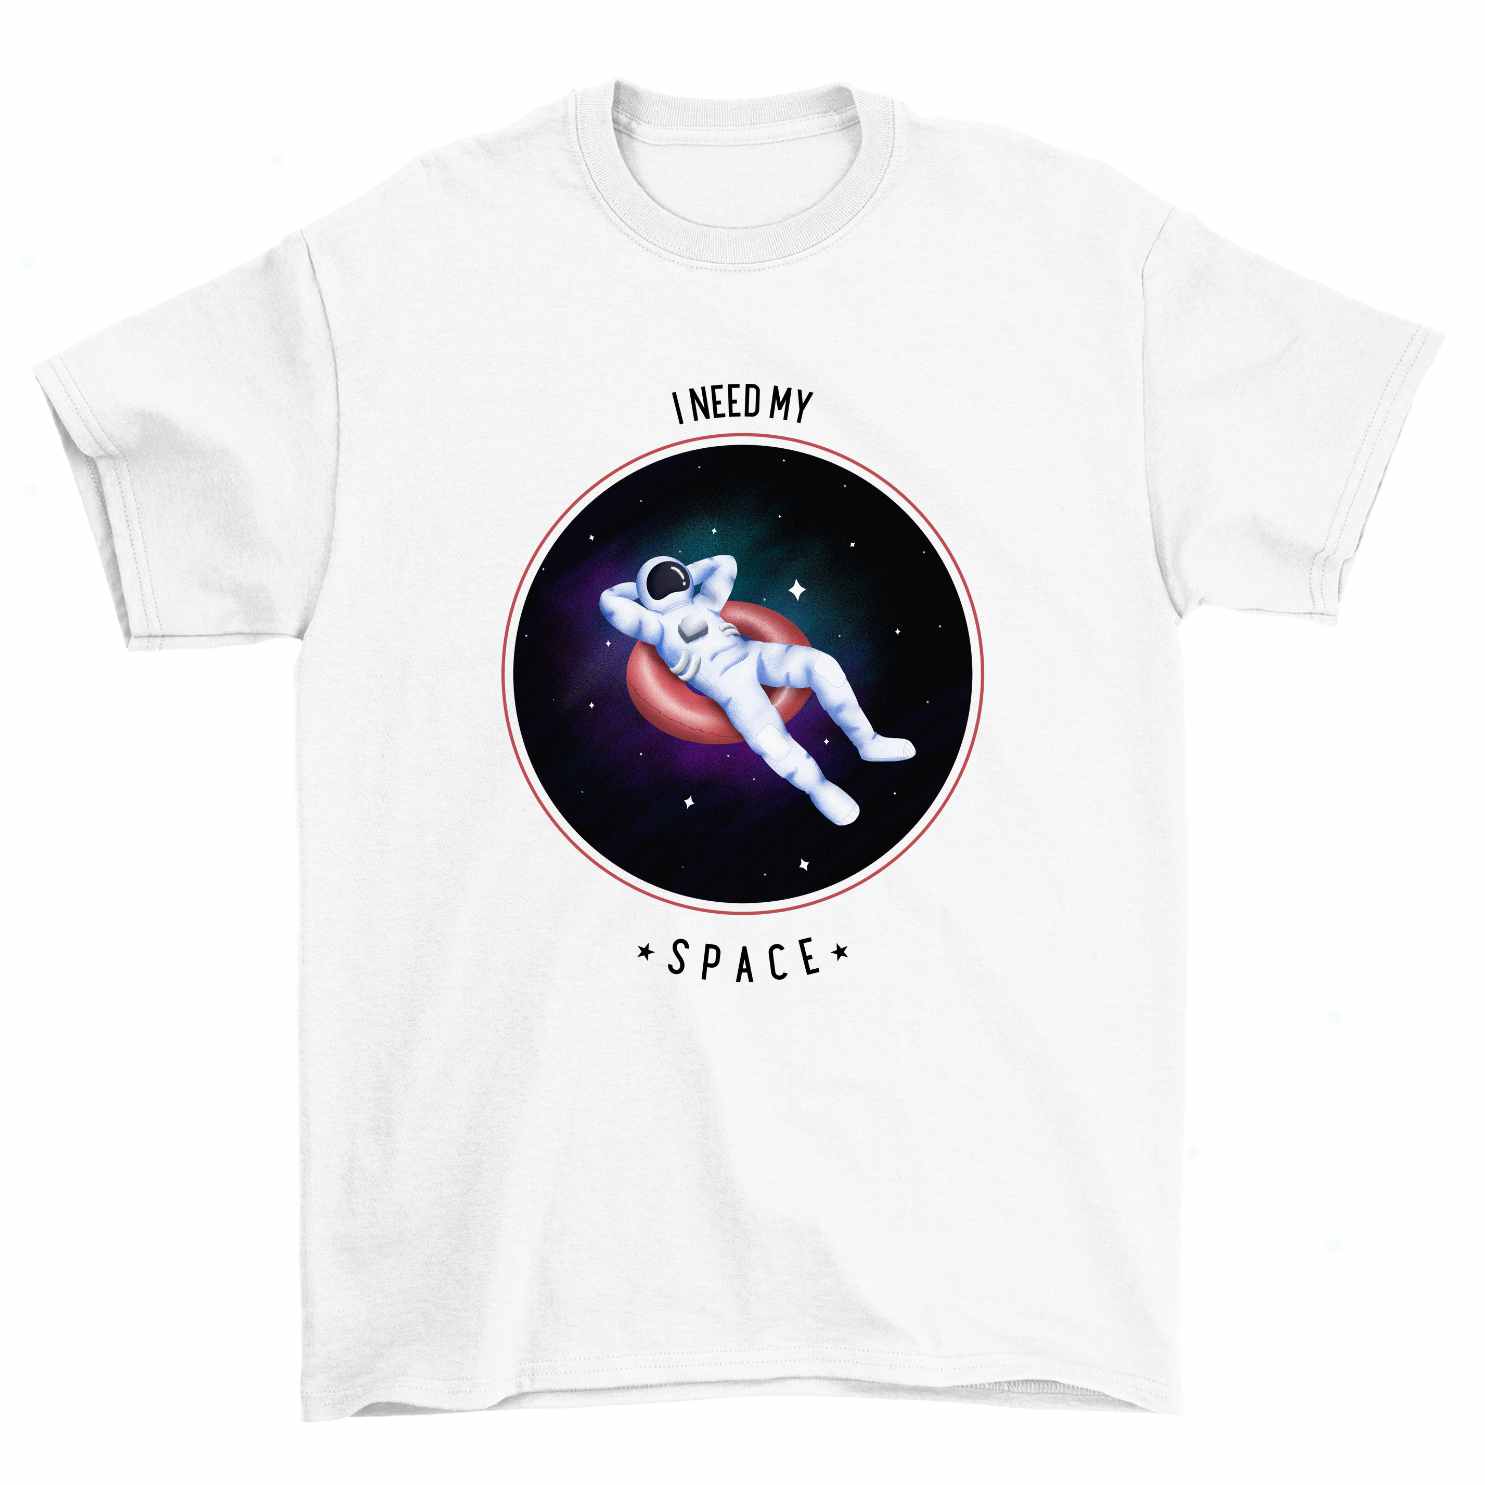 Need my space : Unisex Graphic T-shirt | Graphic Tees